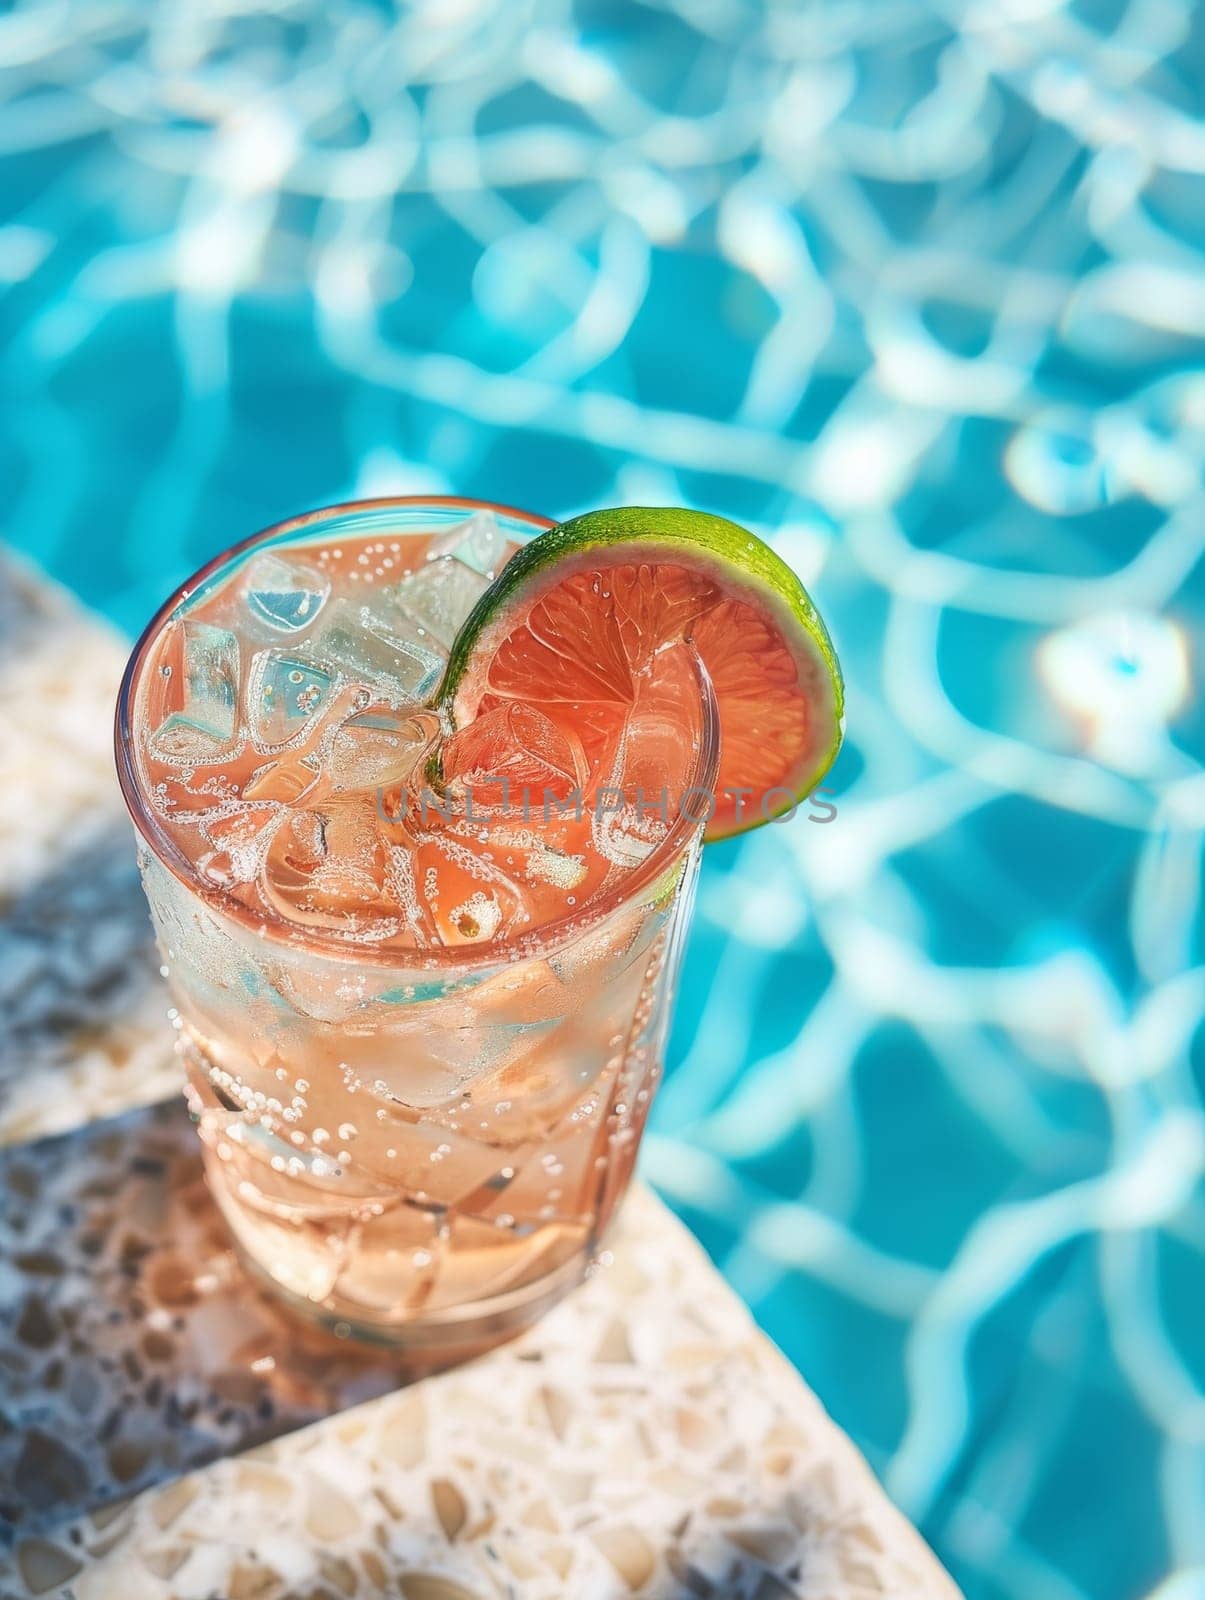 A glass of pink drink with ice cubes in it is sitting on a ledge by a pool. The drink is a refreshing beverage to enjoy on a hot day by the water